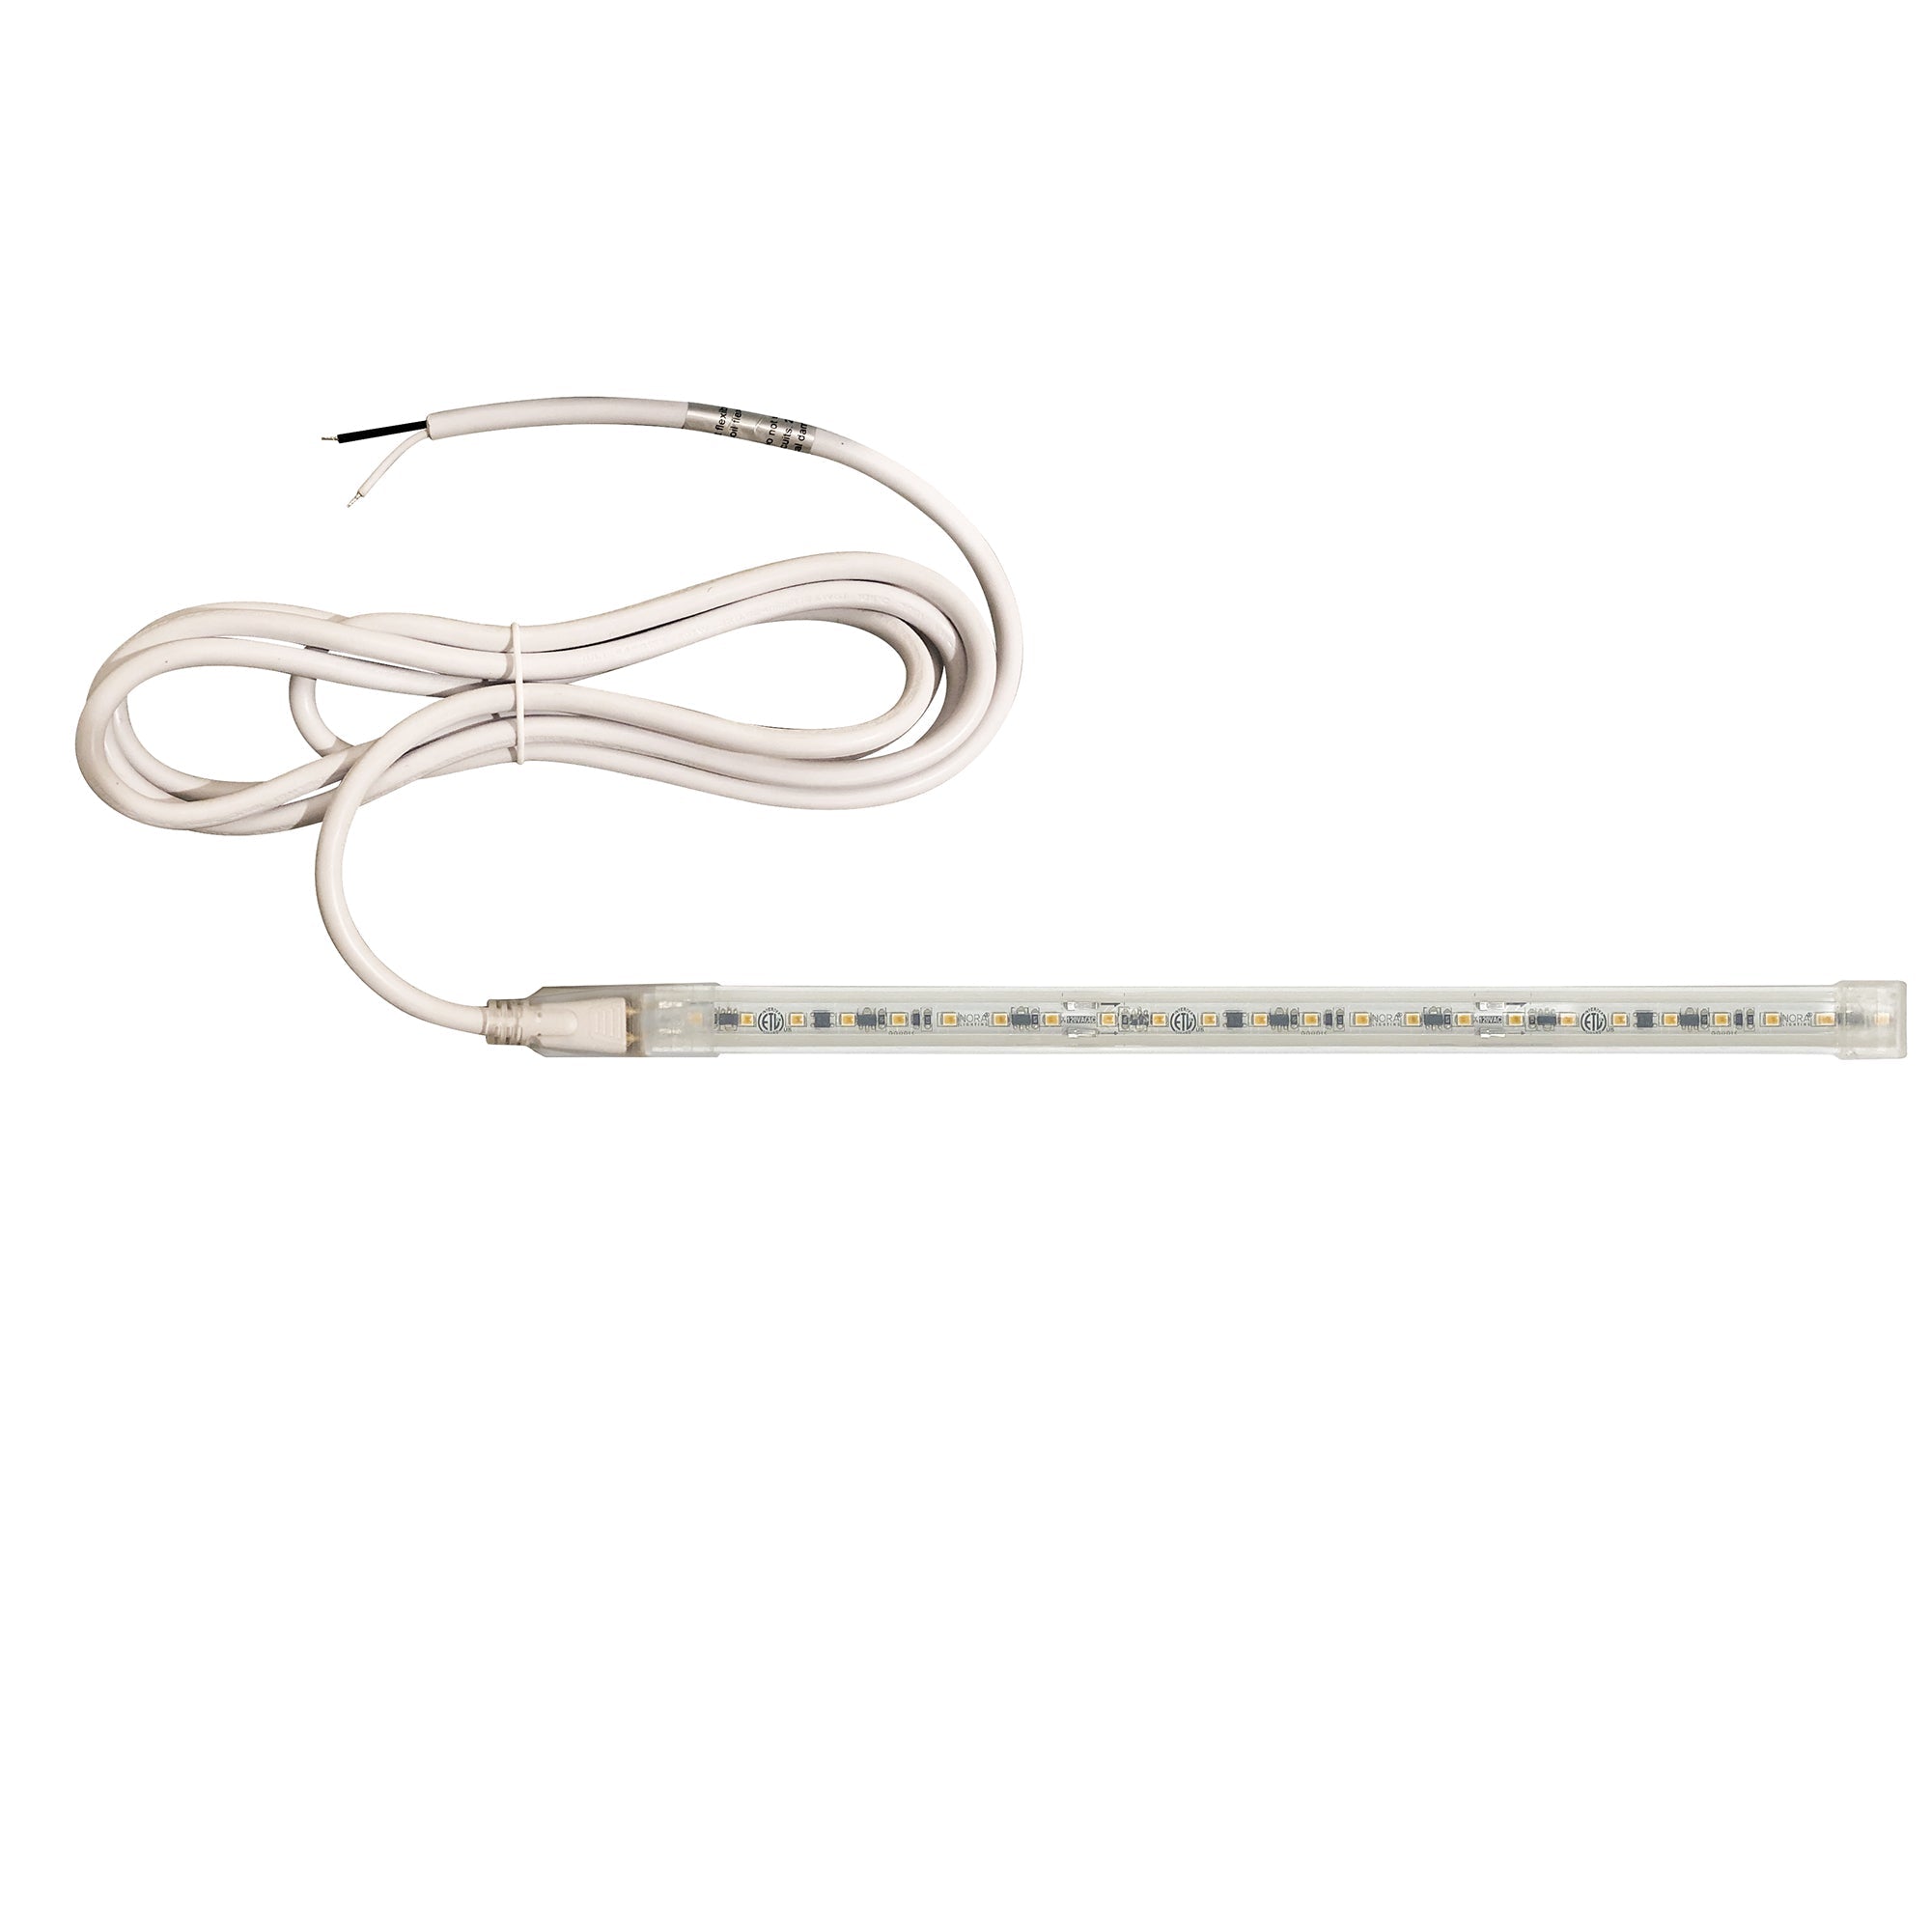 Nora Lighting NUTP13-W76-12-930/HW - Accent / Undercabinet - Custom Cut 76-ft 120V Continuous LED Tape Light, 330lm / 3.6W per foot, 3000K, w/ Mounting Clips and 8' Hardwired Power Cord